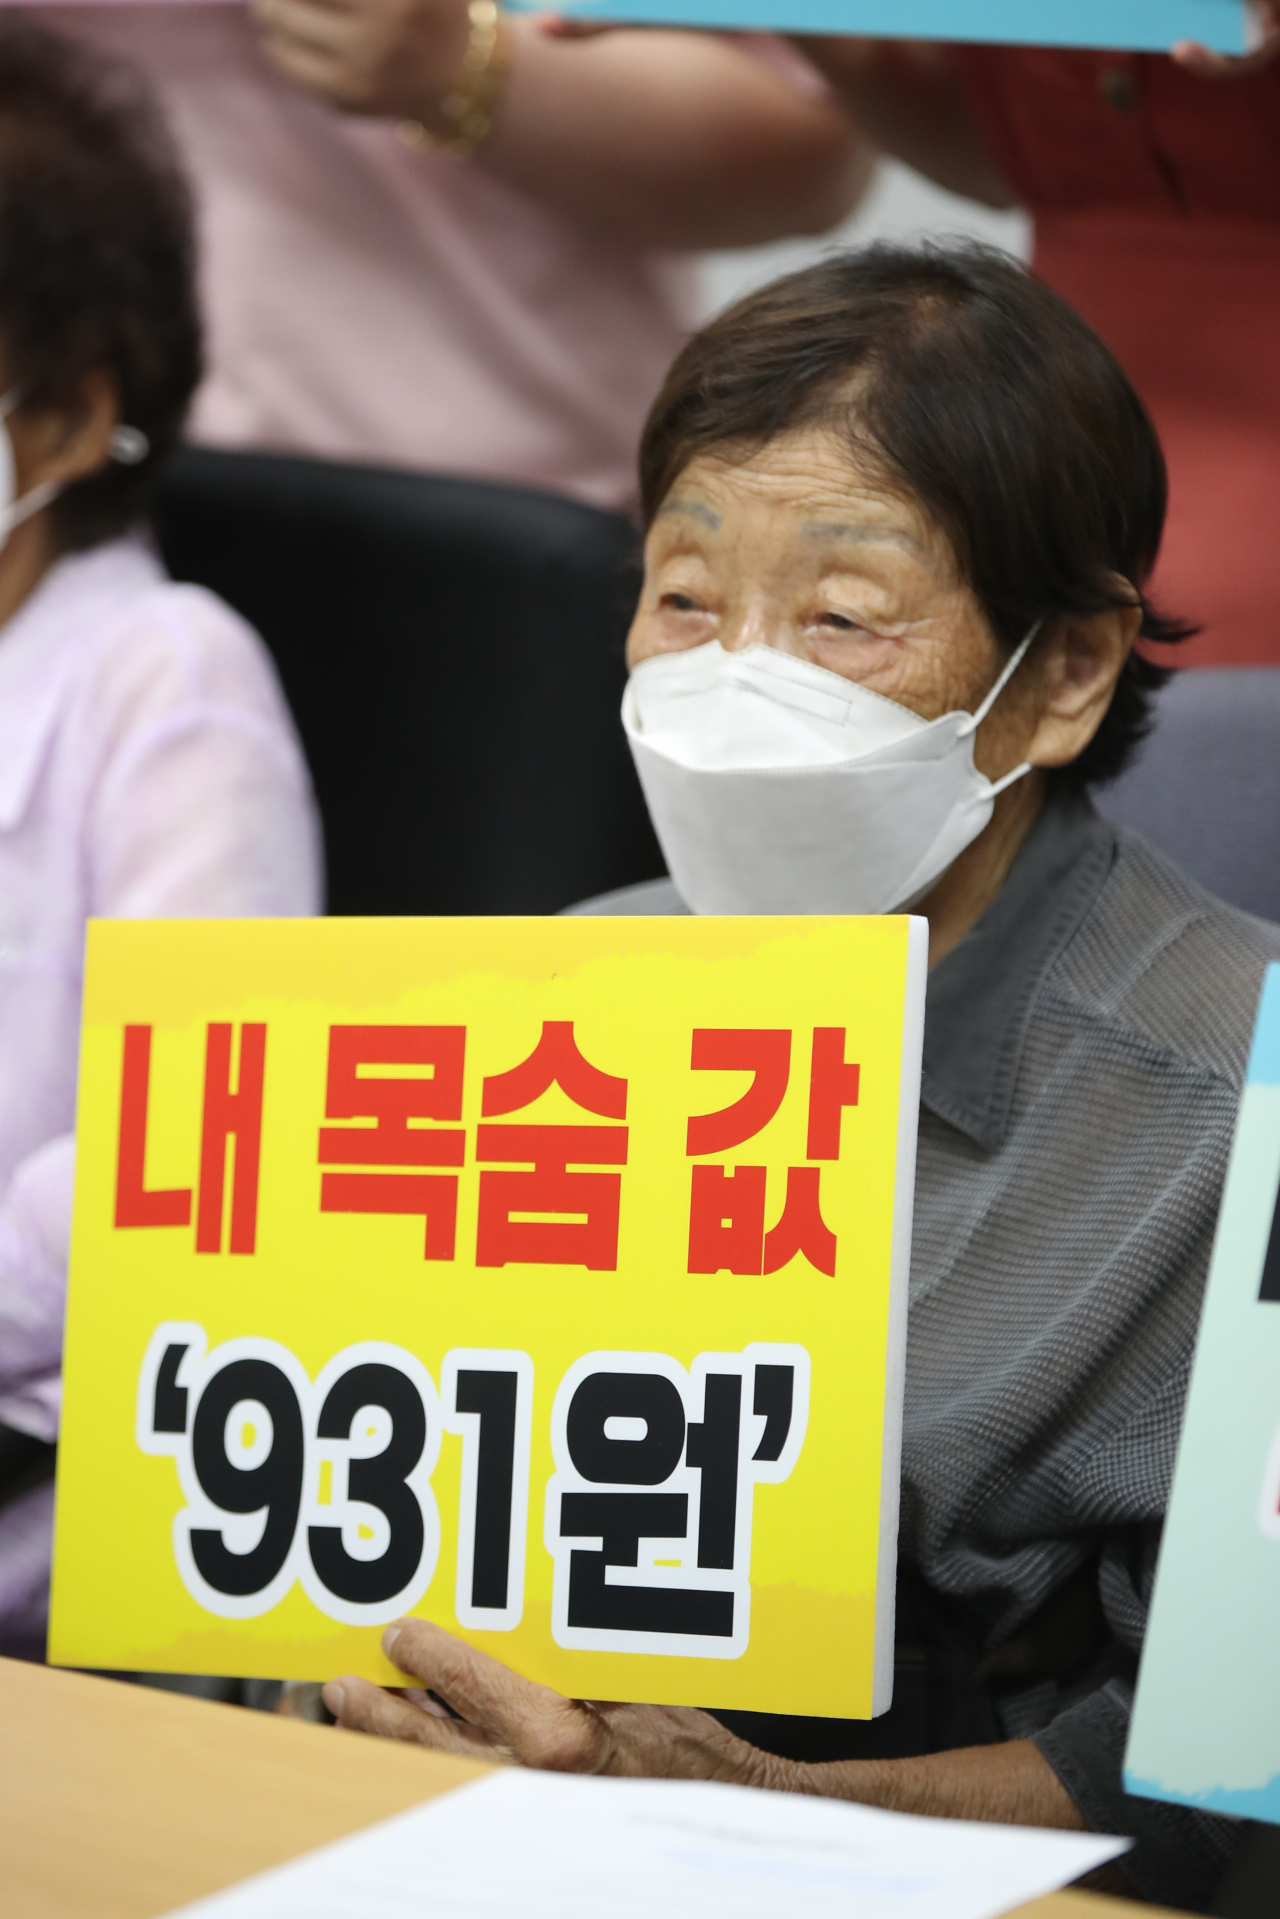 Chung Sin-young, a victim of forced labor under Japanese imperialism, holds a signboard that reads “The price of my life, 931 won” during a press conference held at Gwangju, Gyeonggi Province, Thursday. (Yonhap)